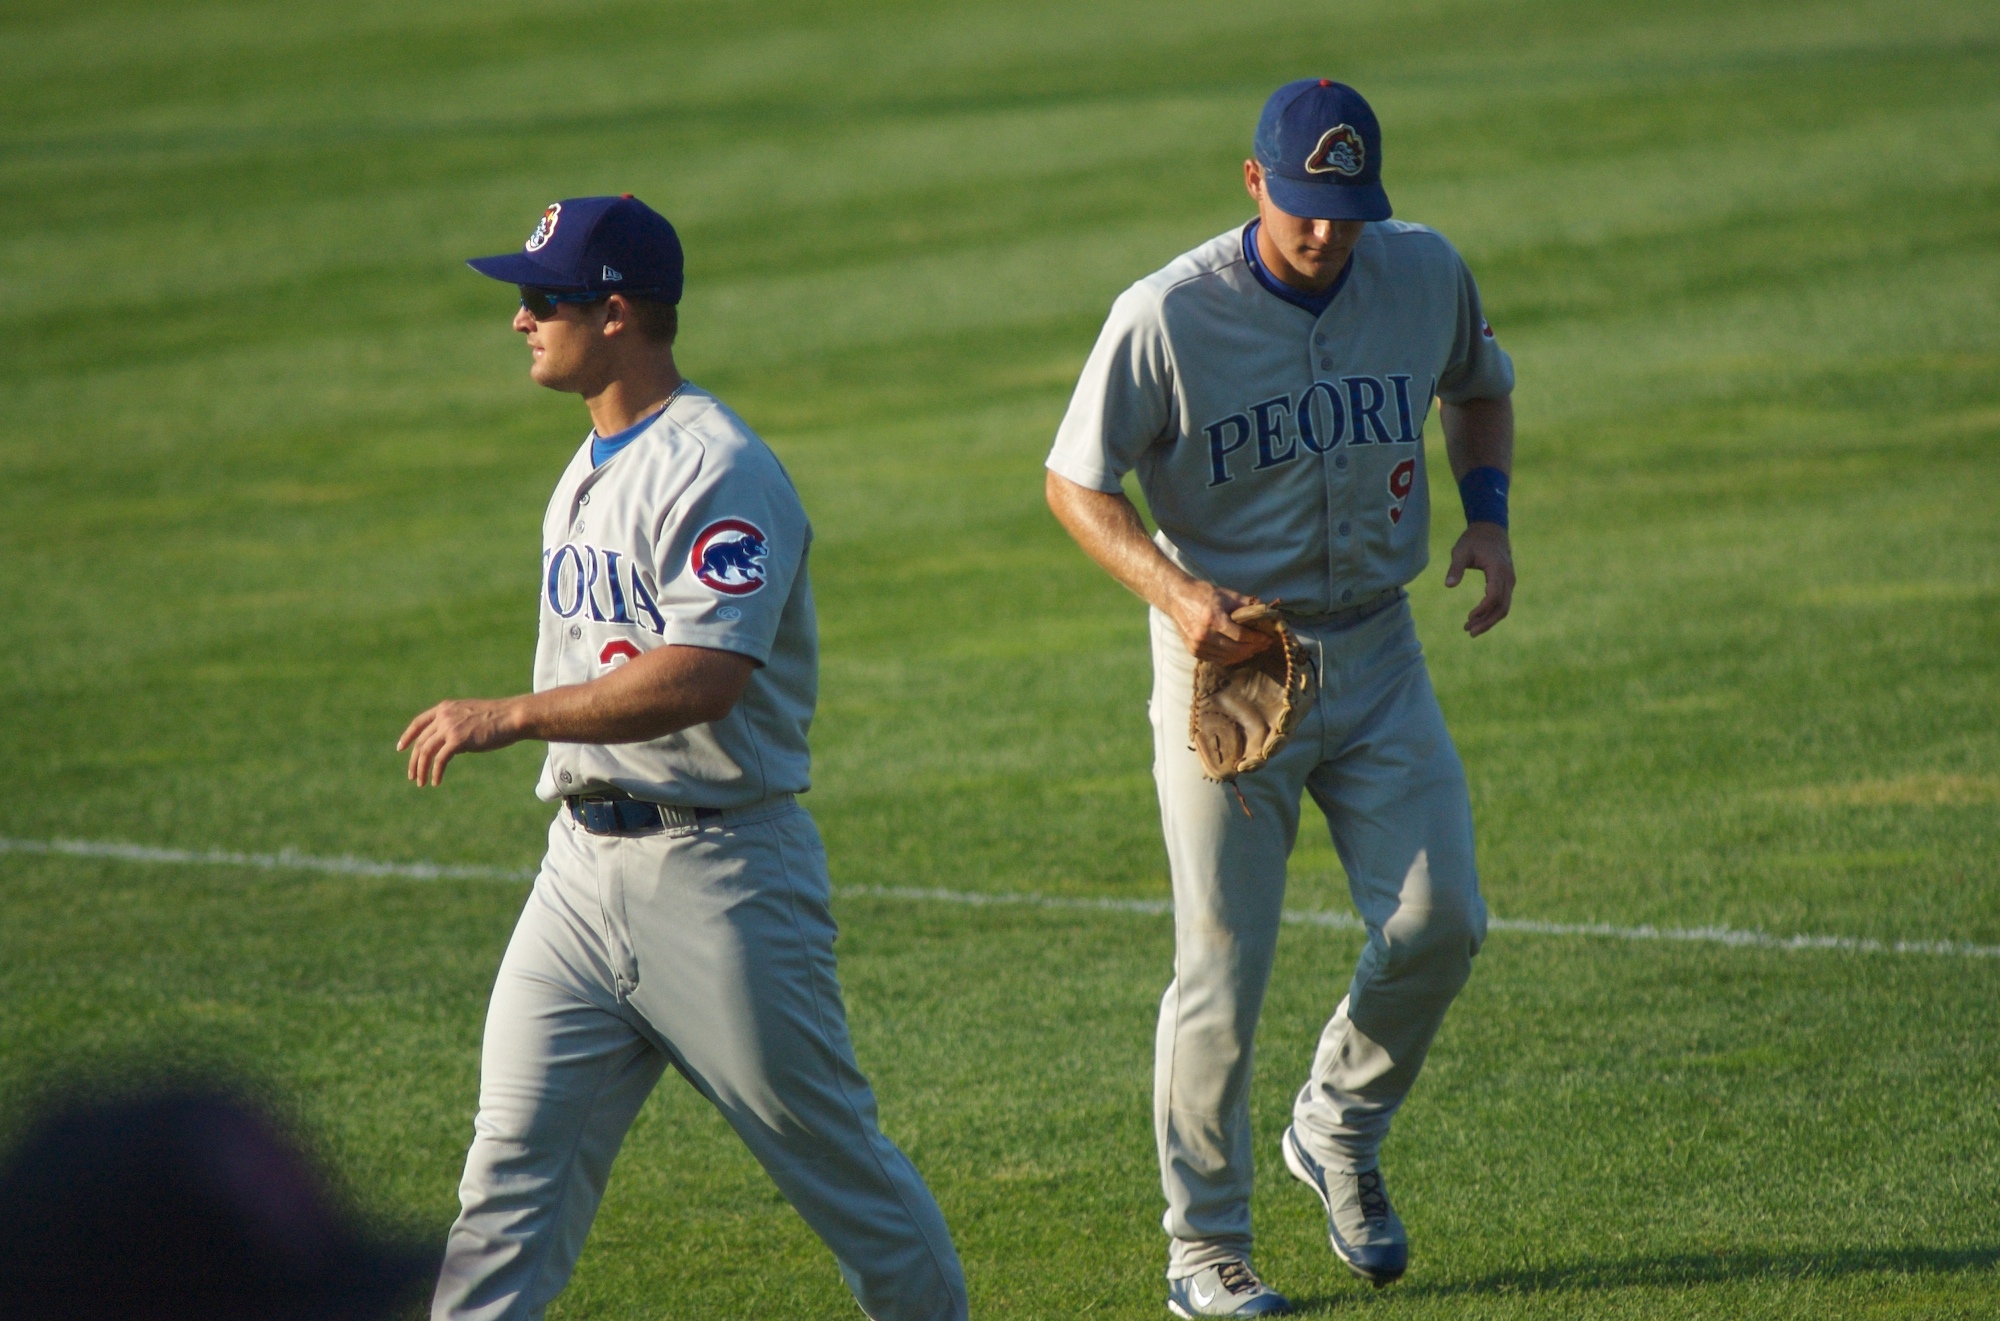 two baseball players with blue and grey uniforms are on the field